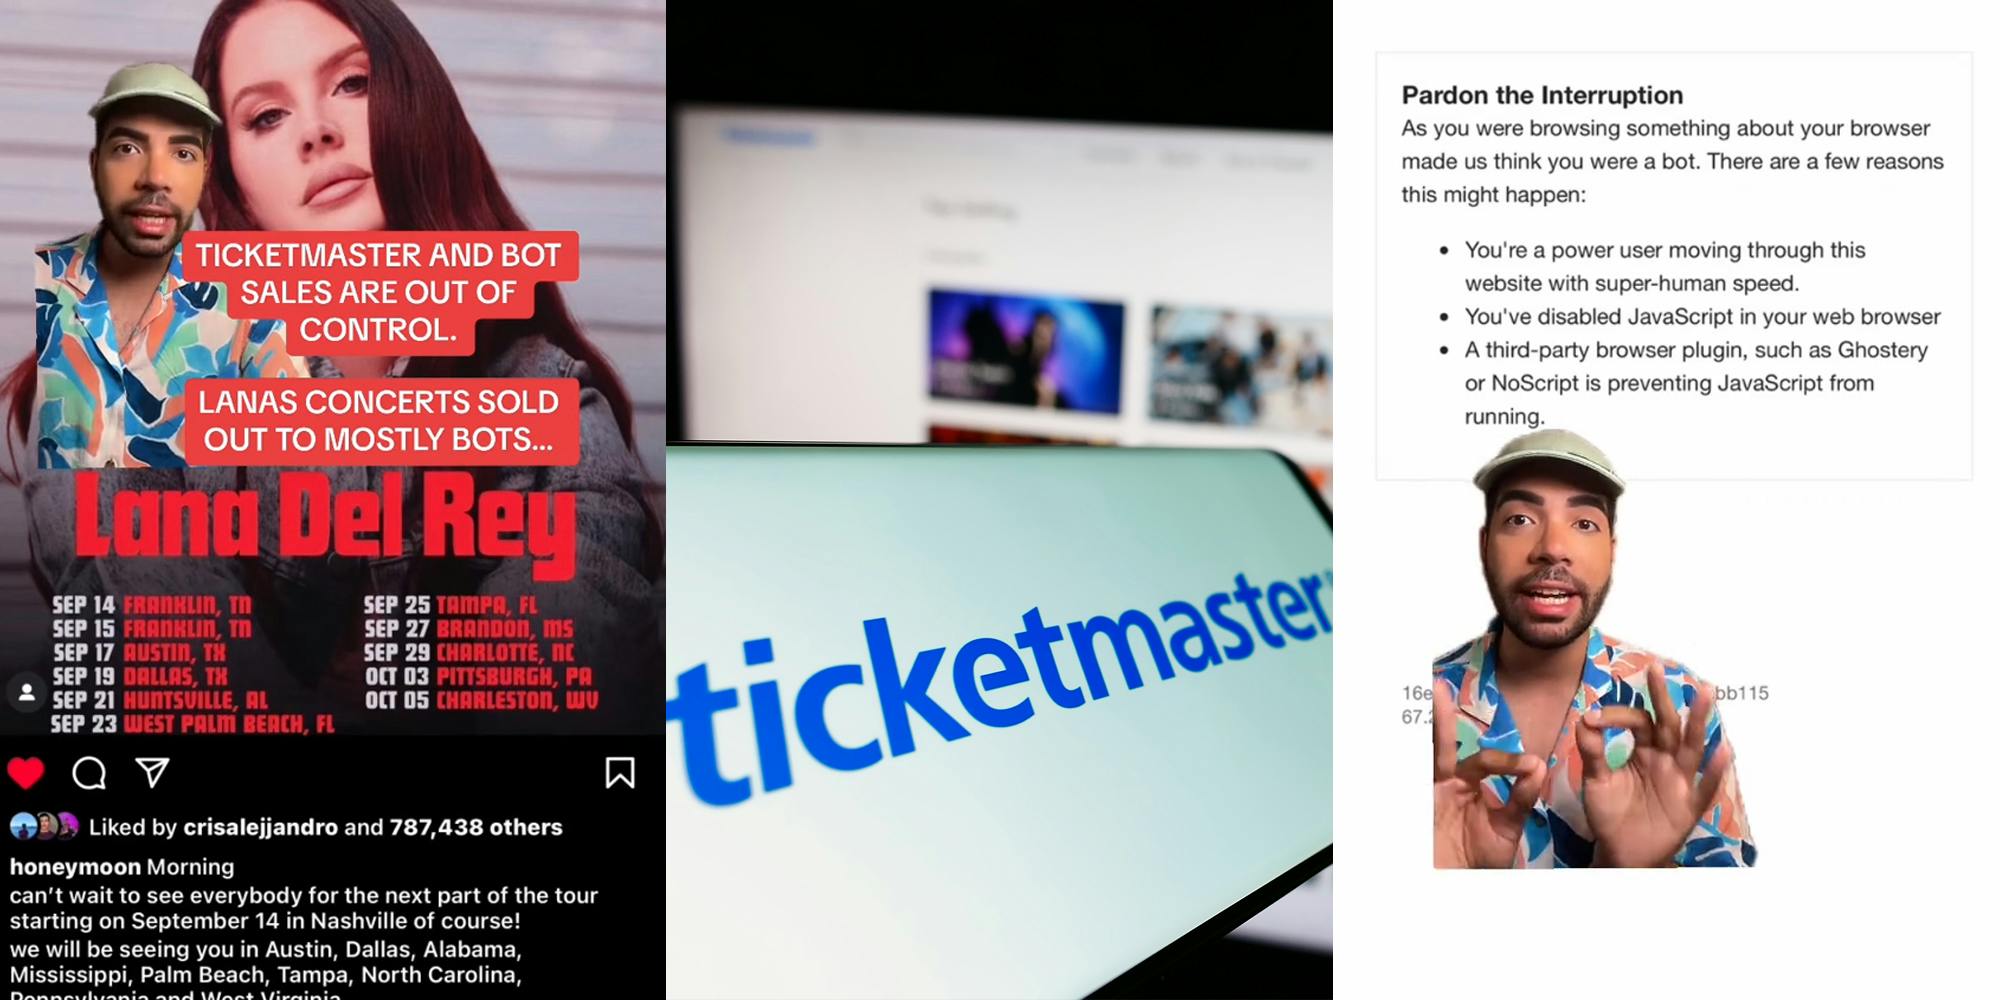 man speaking over Lana Del Rey Instagram post with caption "TICKETMASTER AND BOT SALES ARE OUT OF CONTROL LANAS CONCERTS SOLD OUT TO MOSTLY BOTS..." (l) Ticketmaster on phone screen in front of blurry laptop screen with Ticketmaster site on screen (c) man greenscreen TikTok over Ticketmaster notification "Pardon the Interruption..." (r)